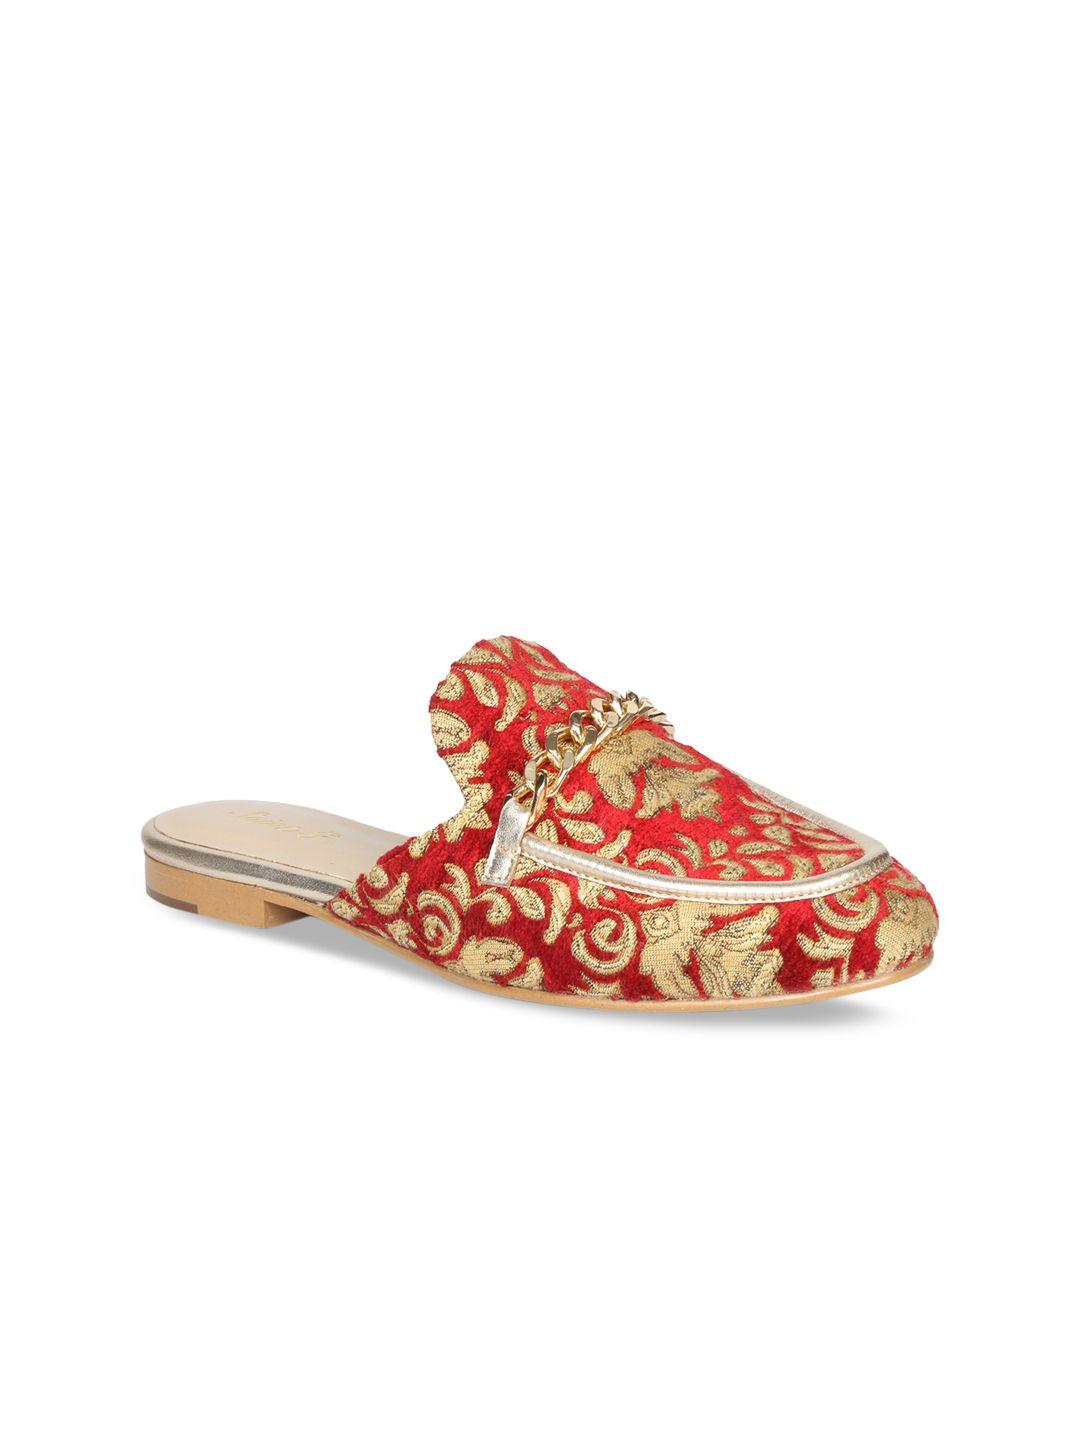 saint g women red & gold-toned woven design leather mules